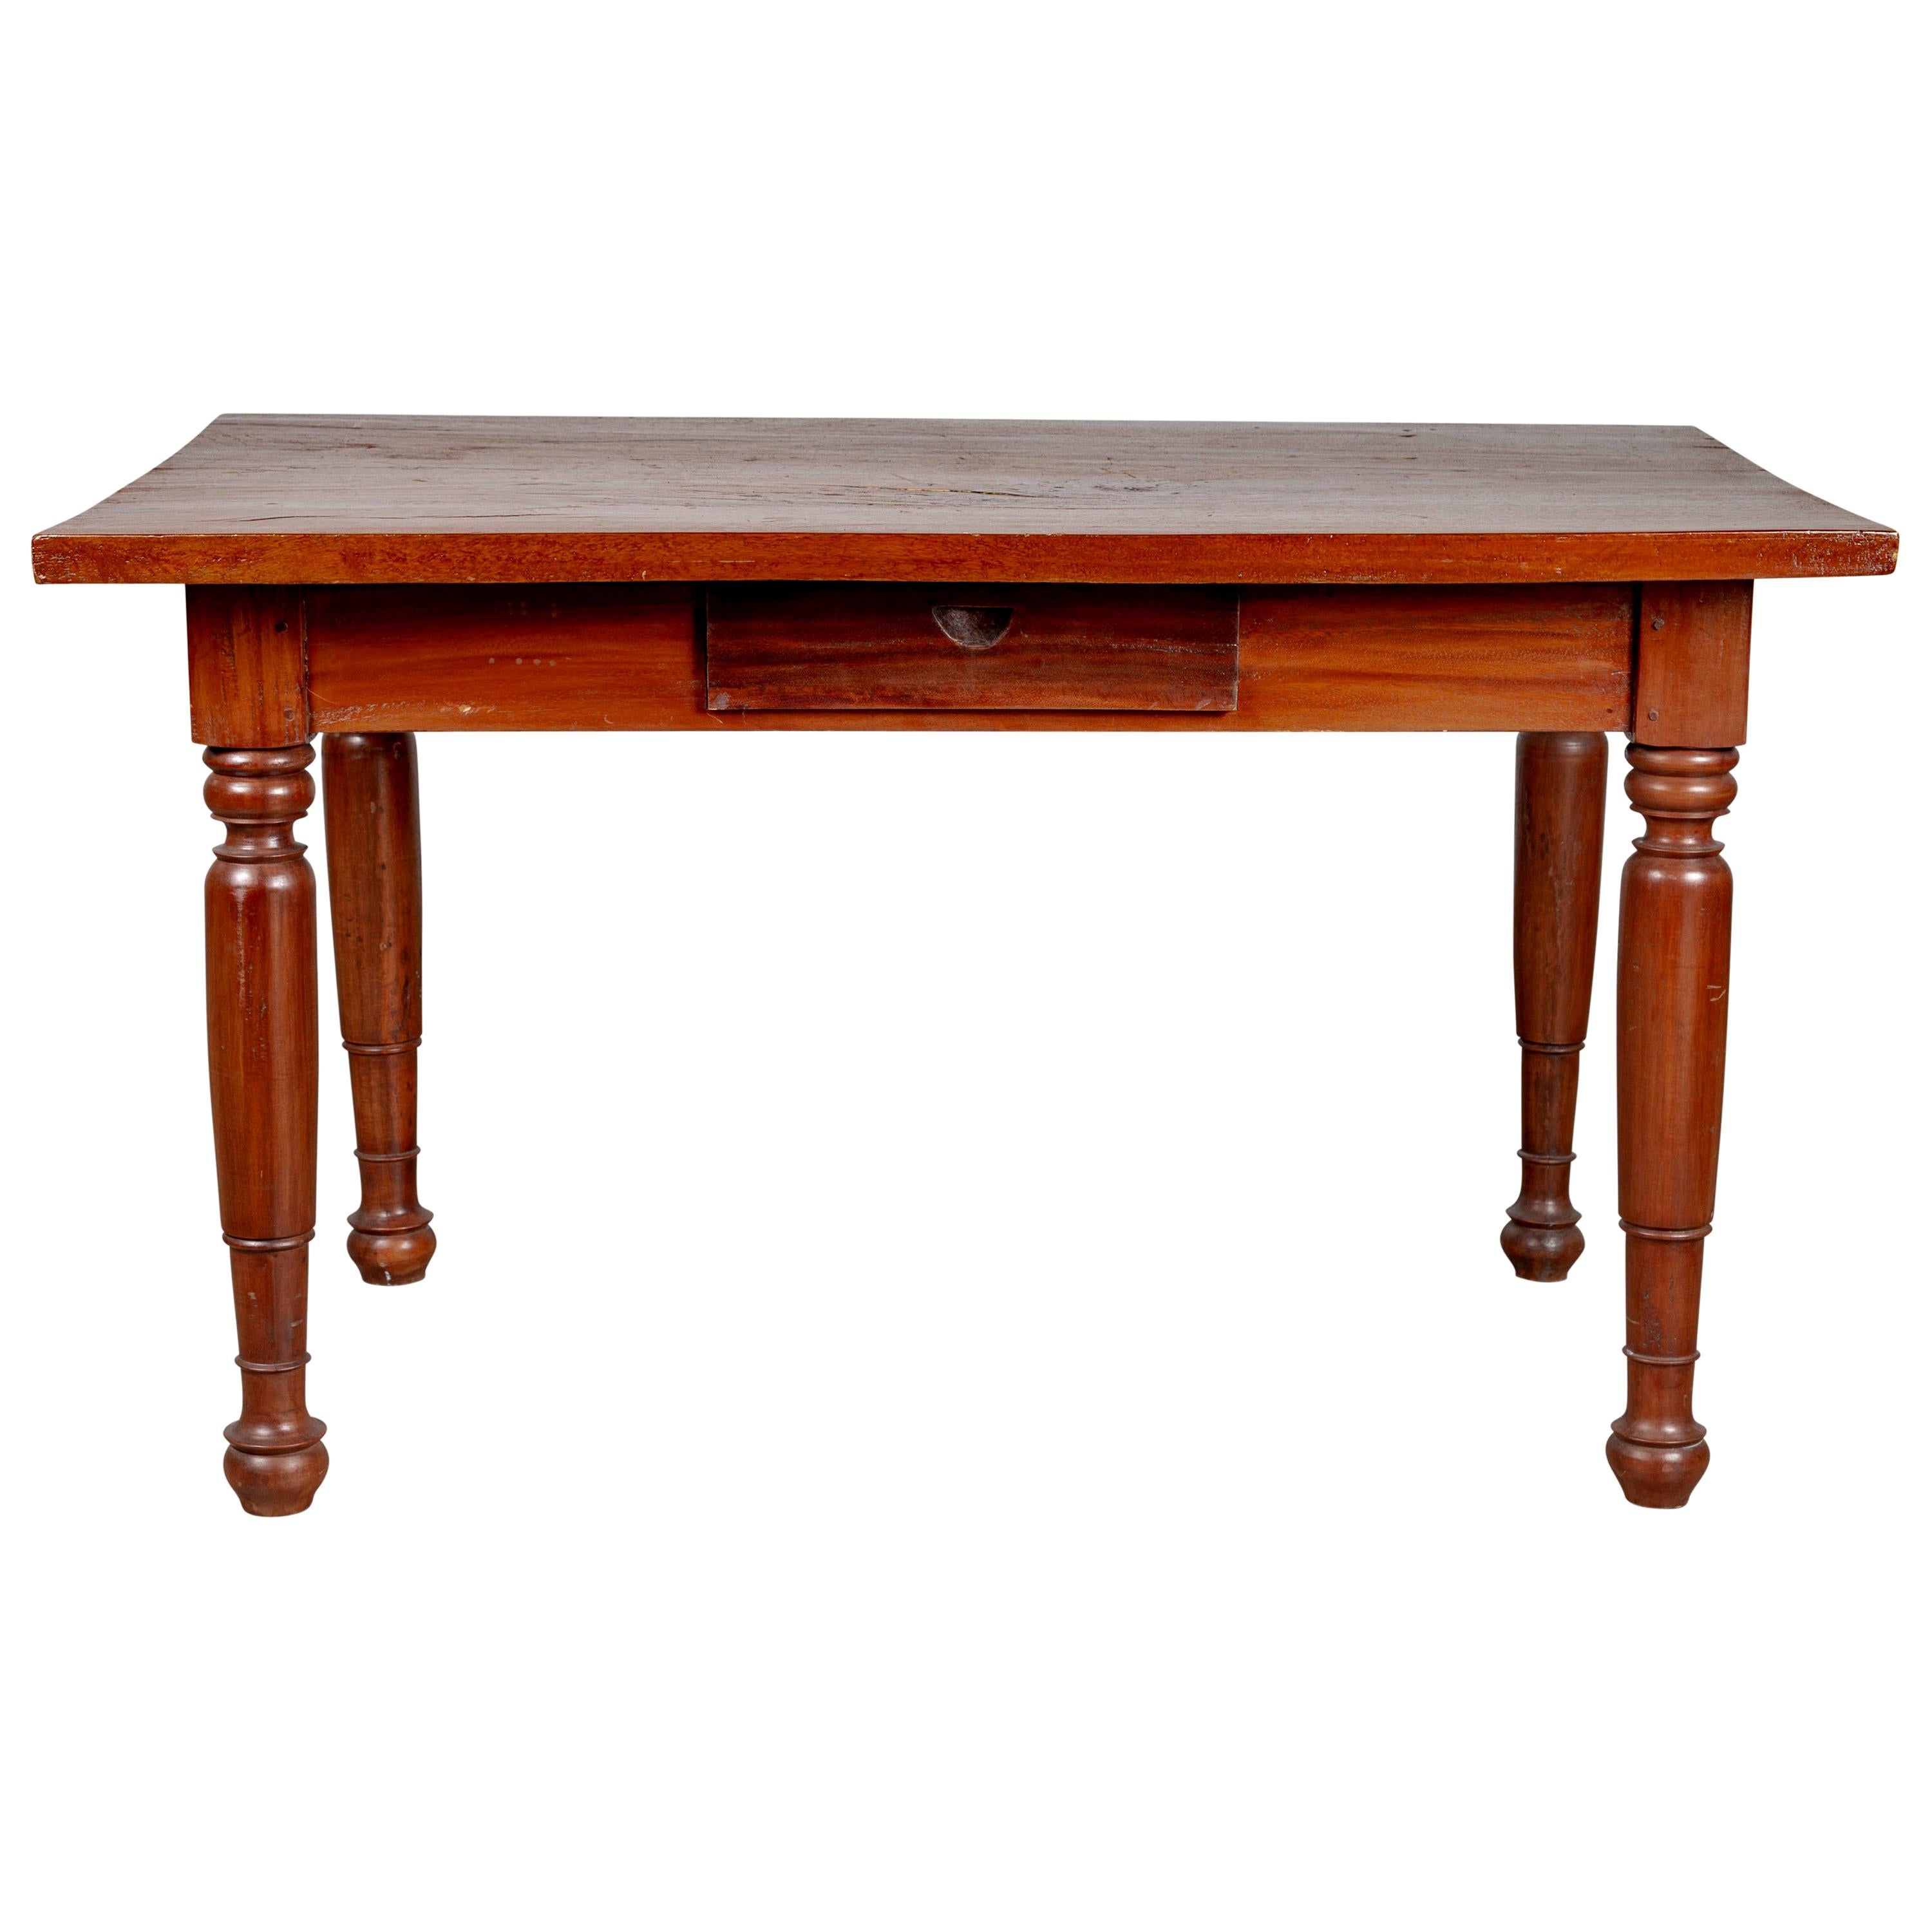 Antique Dutch Colonial Javanese Teak Desk with Single Drawer and Turned Legs For Sale